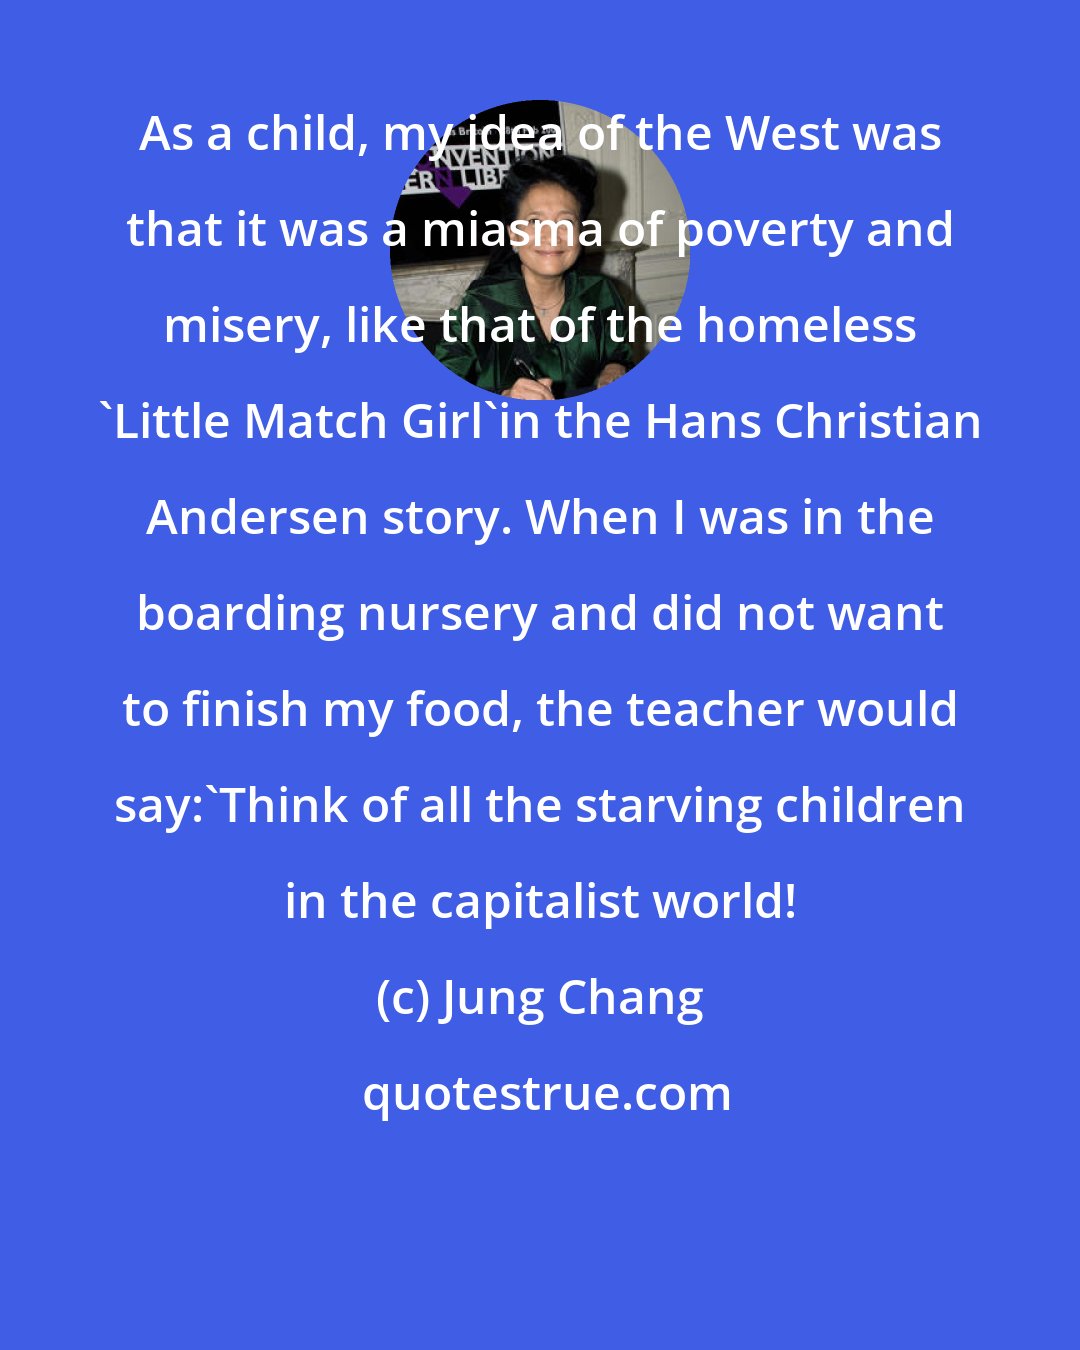 Jung Chang: As a child, my idea of the West was that it was a miasma of poverty and misery, like that of the homeless 'Little Match Girl'in the Hans Christian Andersen story. When I was in the boarding nursery and did not want to finish my food, the teacher would say:'Think of all the starving children in the capitalist world!